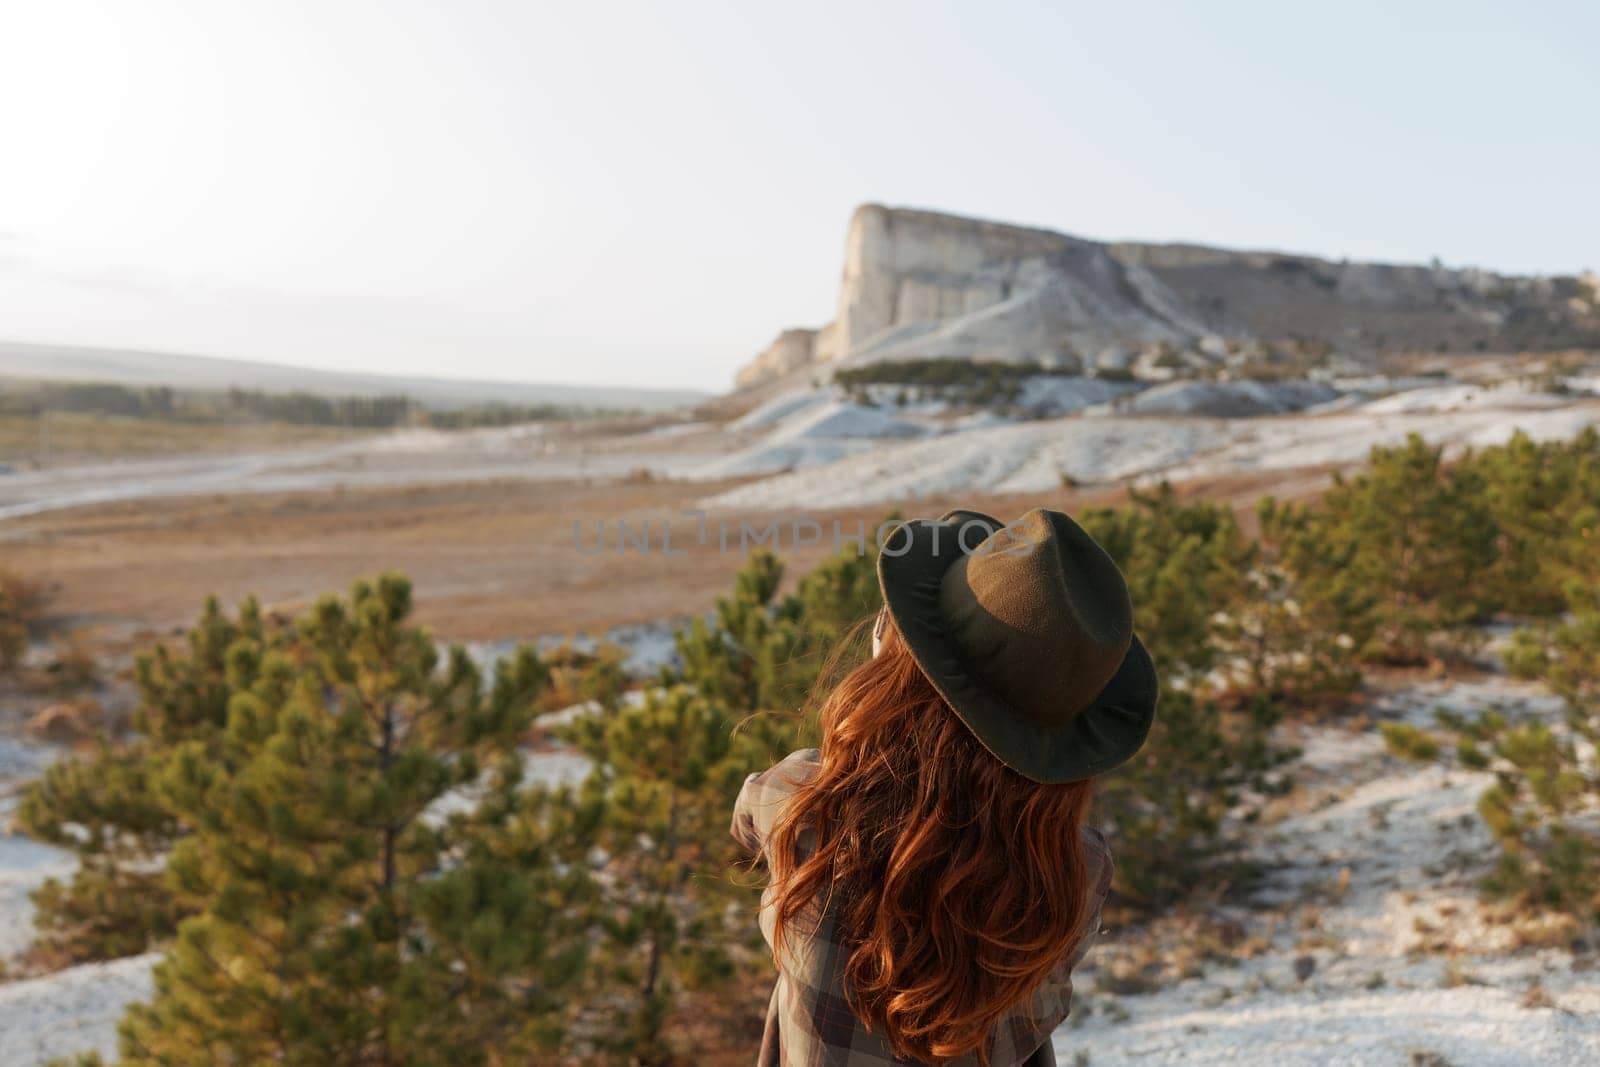 Redhaired woman in hat gazes at majestic mountain vista on horizon by Vichizh